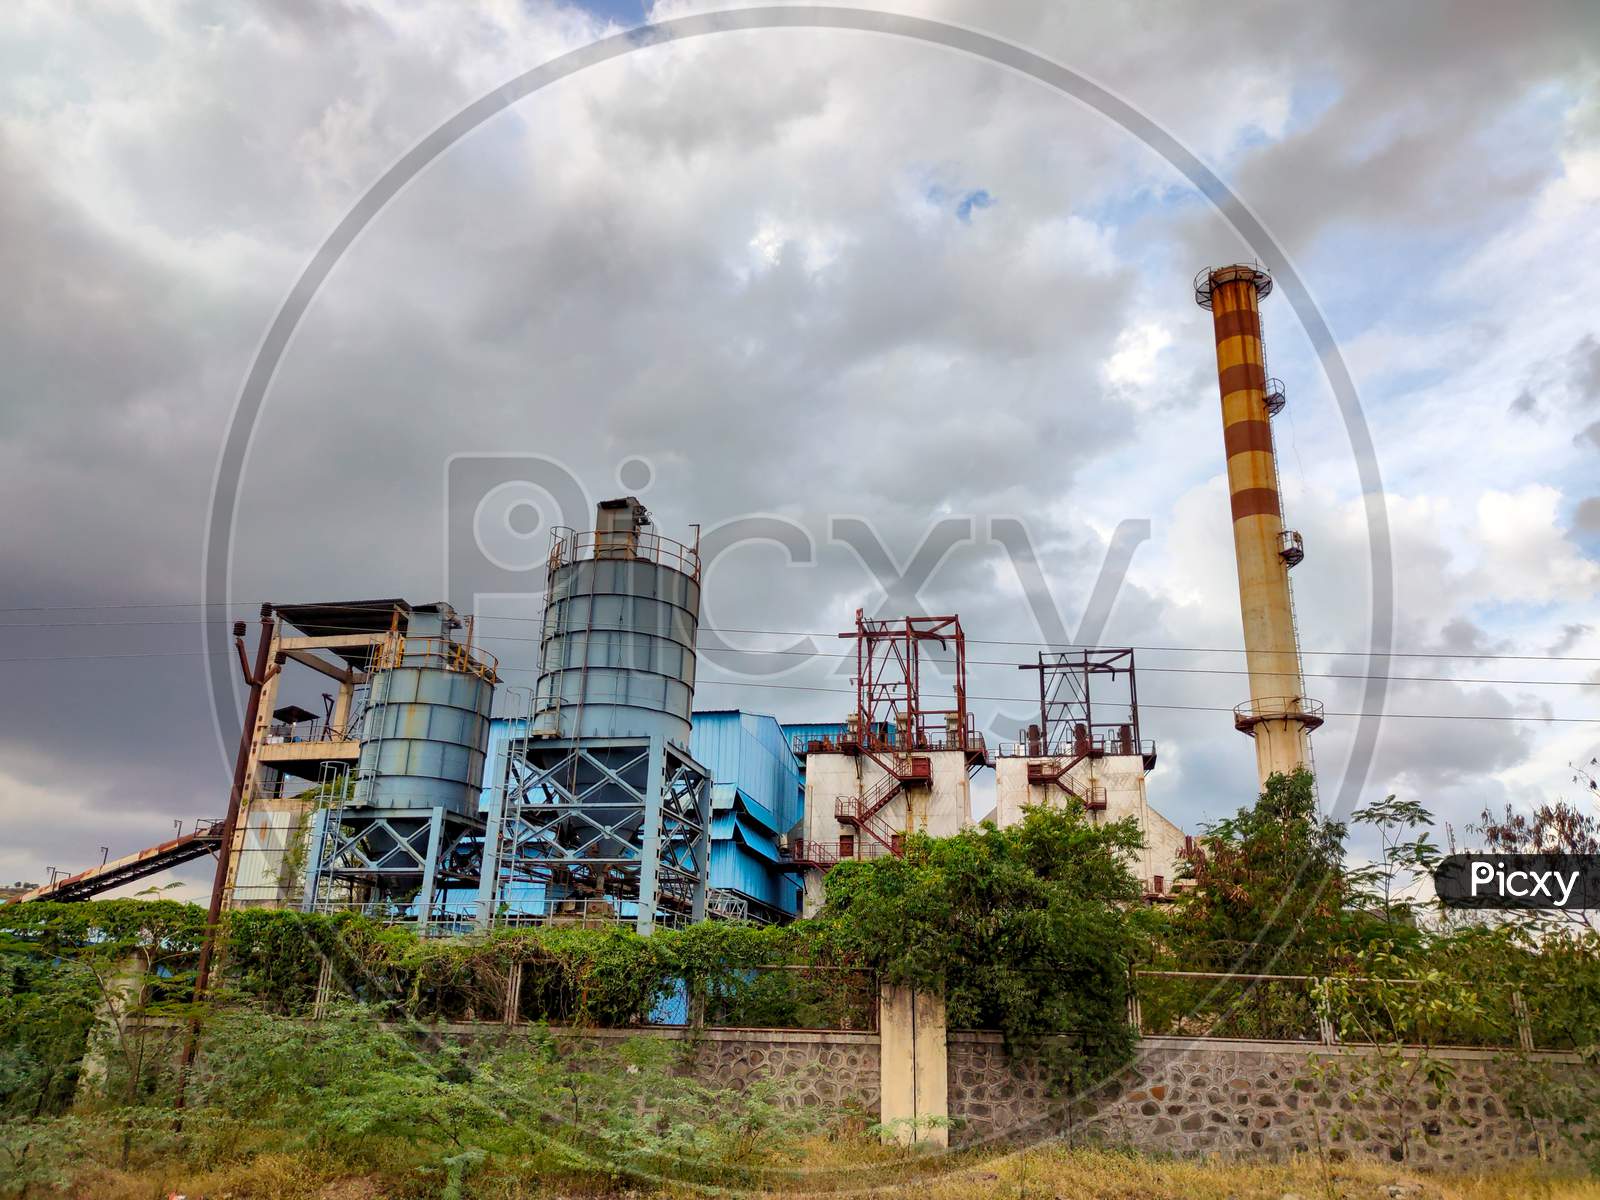 Metallurgical plant with pipes, environmental pollution. Industrial landscape